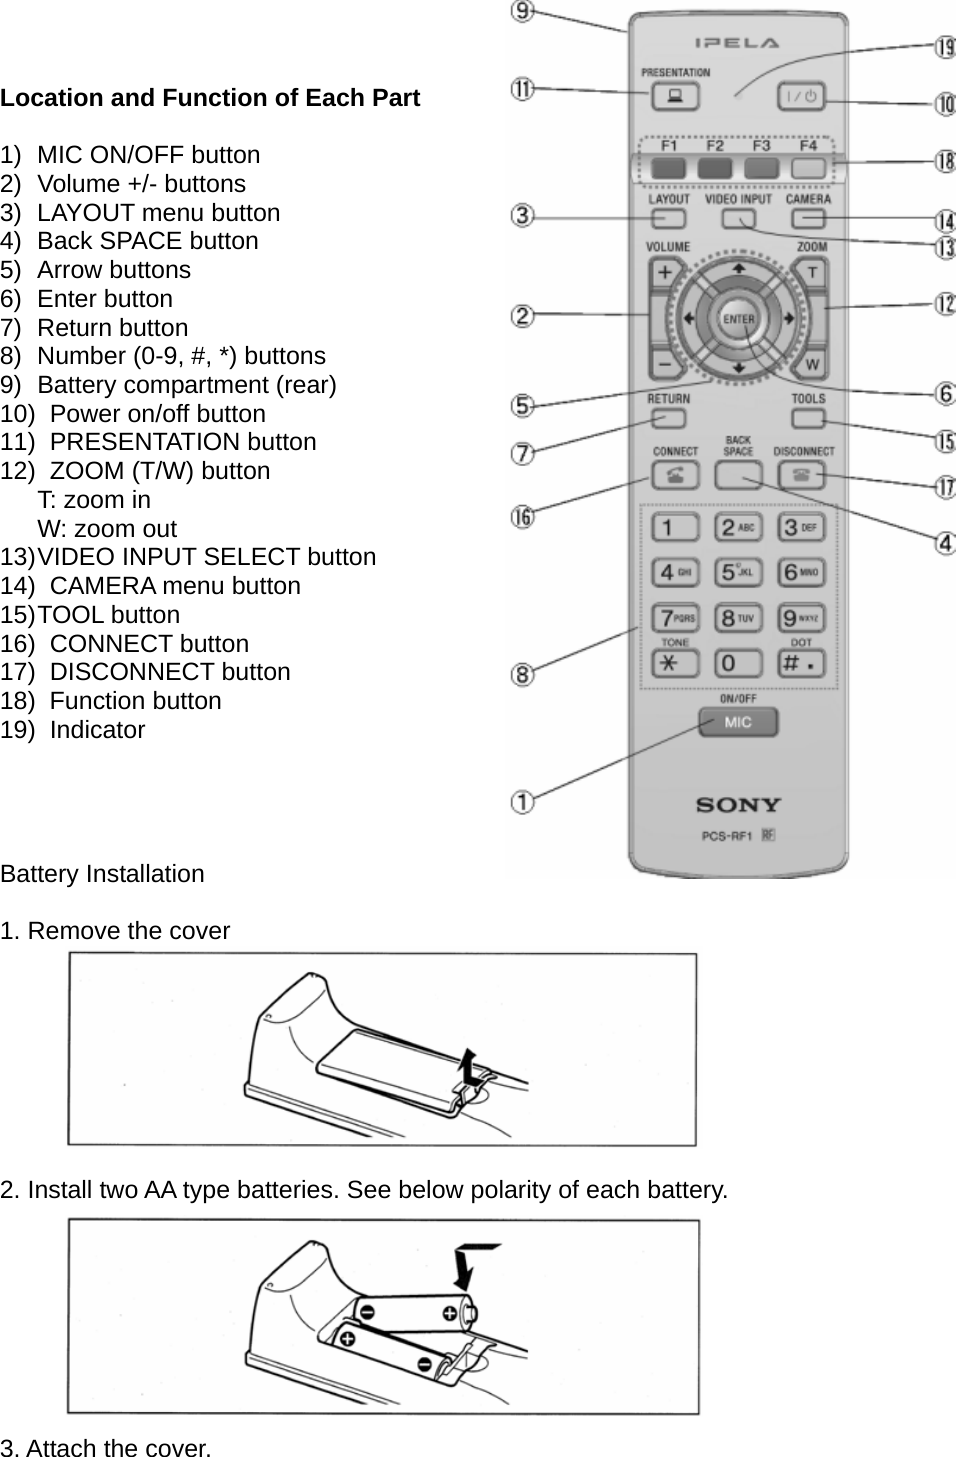        Location and Function of Each Part  1)  MIC ON/OFF button 2) Volume +/- buttons 3)  LAYOUT menu button 4)  Back SPACE button 5) Arrow buttons 6) Enter button 7) Return button 8)  Number (0-9, #, *) buttons 9) Battery compartment (rear) 10)   Power on/off button 11)   PRESENTATION  button 12)   ZOOM (T/W) button T: zoom in W: zoom out 13) VIDEO INPUT SELECT button 14)   CAMERA menu button 15) TOOL  button 16)   CONNECT  button 17)   DISCONNECT  button 18)   Function  button 19)   Indicator     Battery Installation  1. Remove the cover         2. Install two AA type batteries. See below polarity of each battery.         3. Attach the cover. 